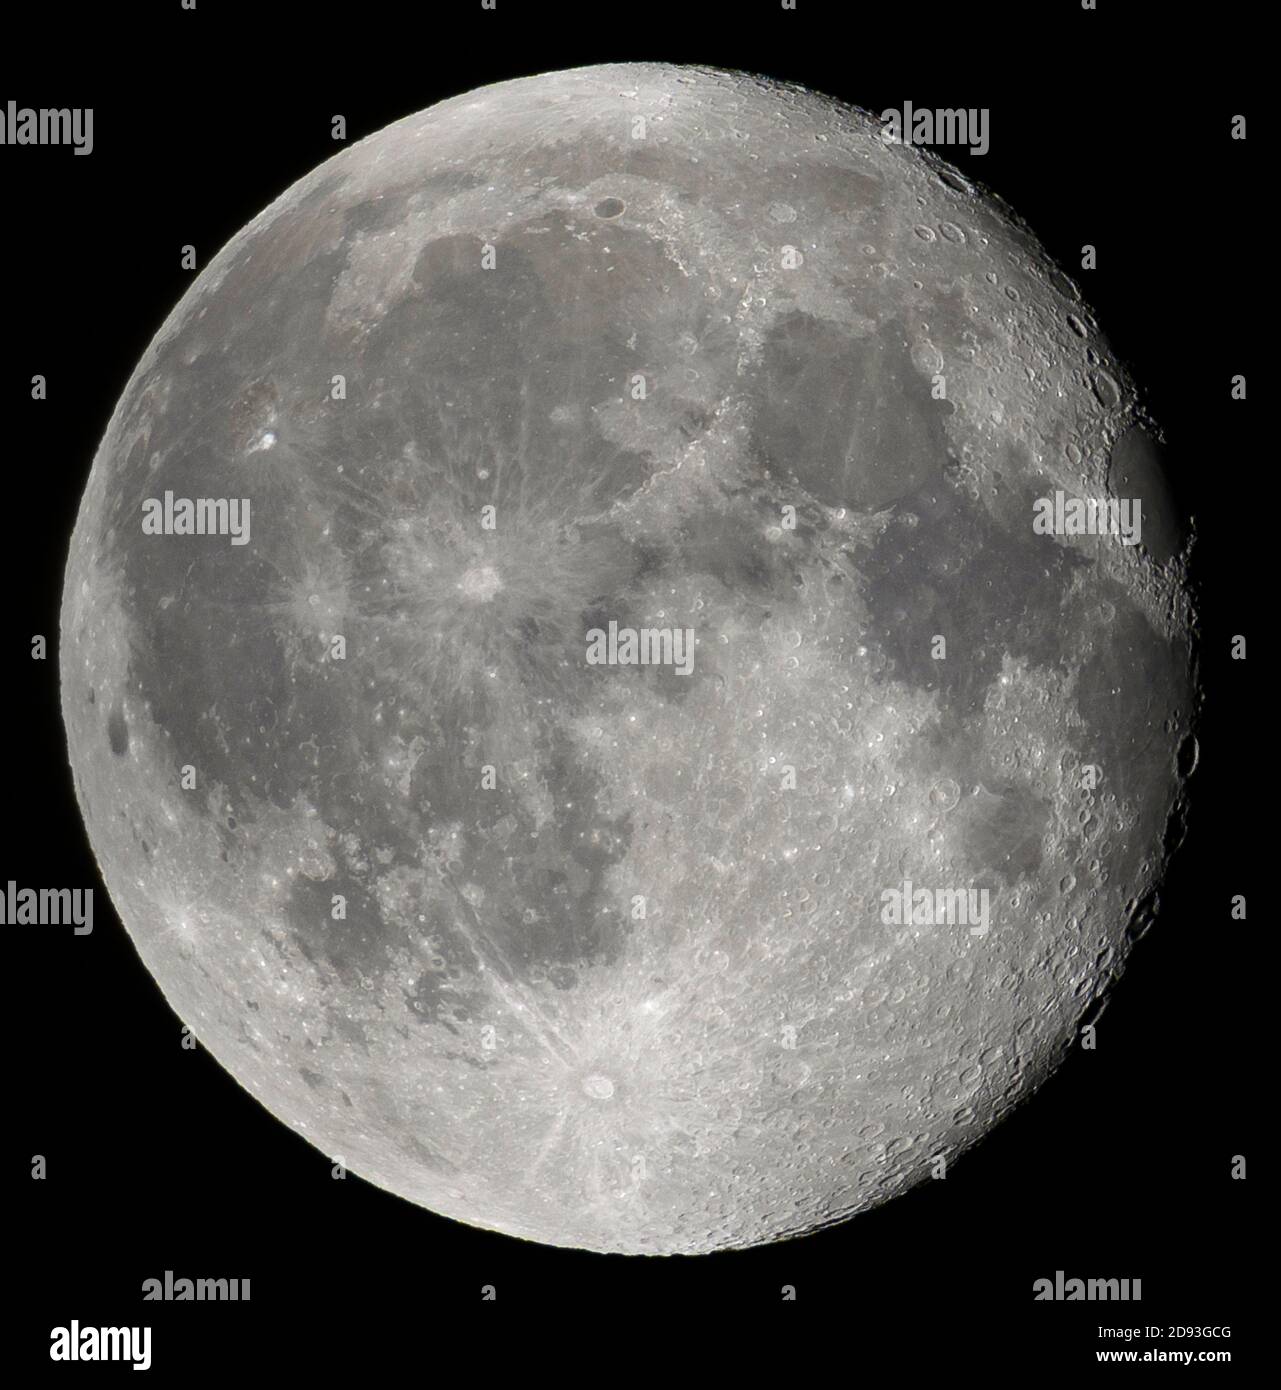 London, UK. 2 November 2020. 95.5% Waning Gibbous Moon in clear overnight sky. Credit: Malcolm Park/Alamy Live News. Stock Photo